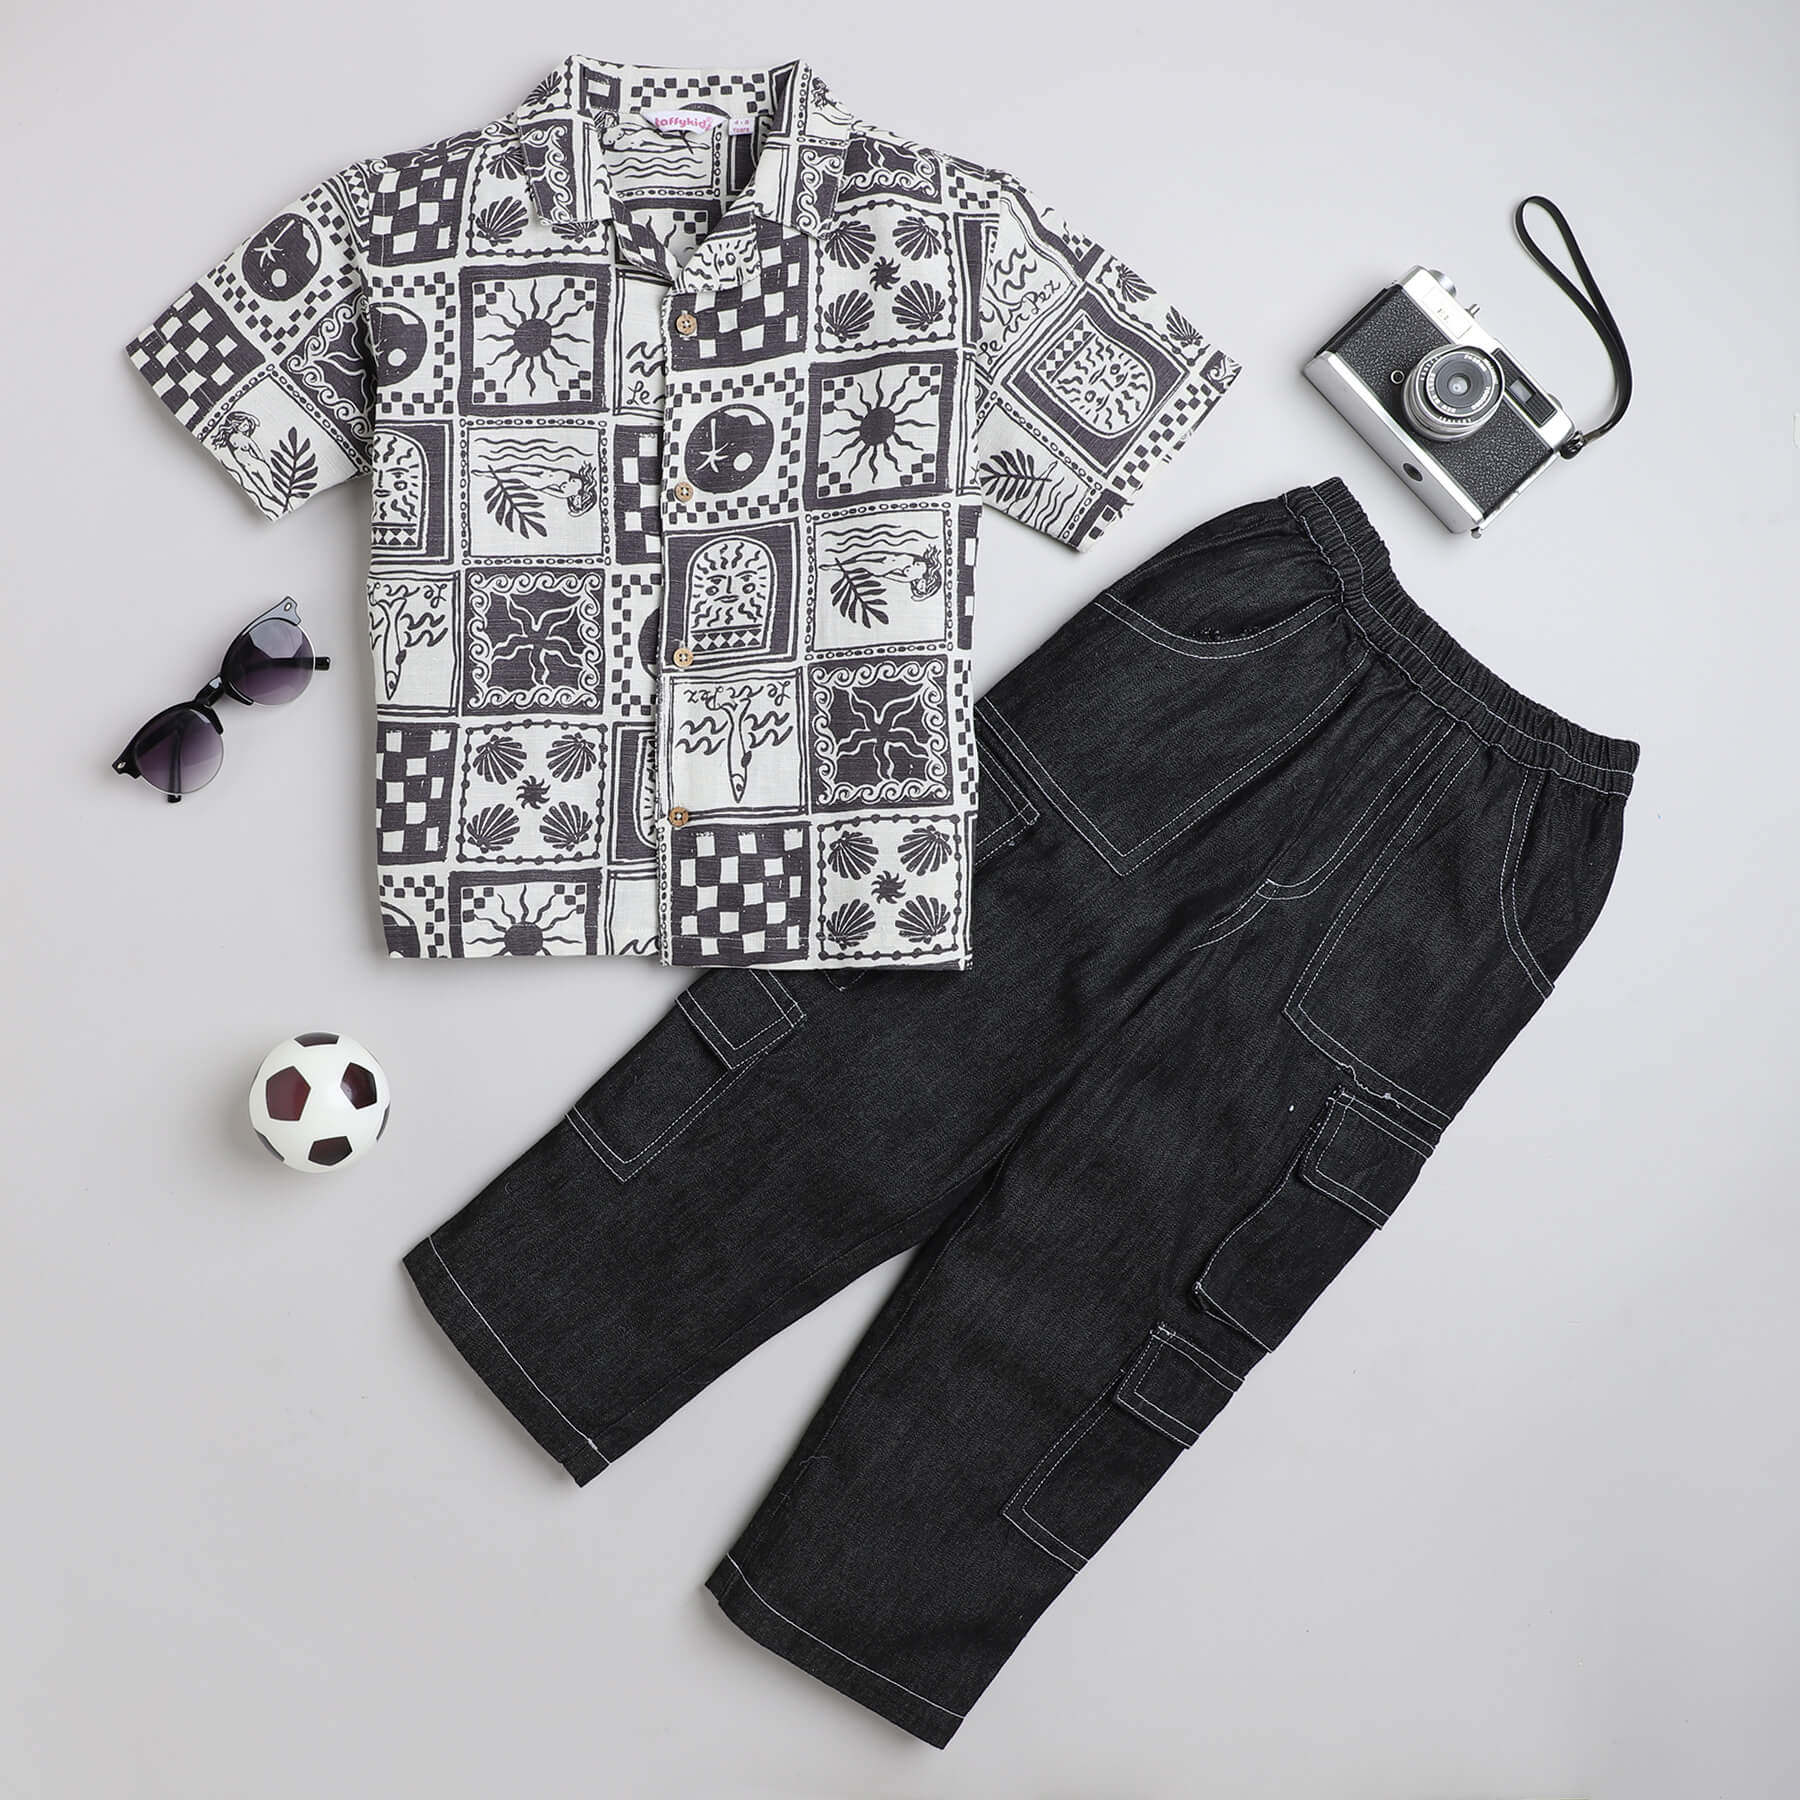 Taffykids patchwork printed half sleeves oversized shirt and stitch detail cargo denim pant set-Offwhite/Black